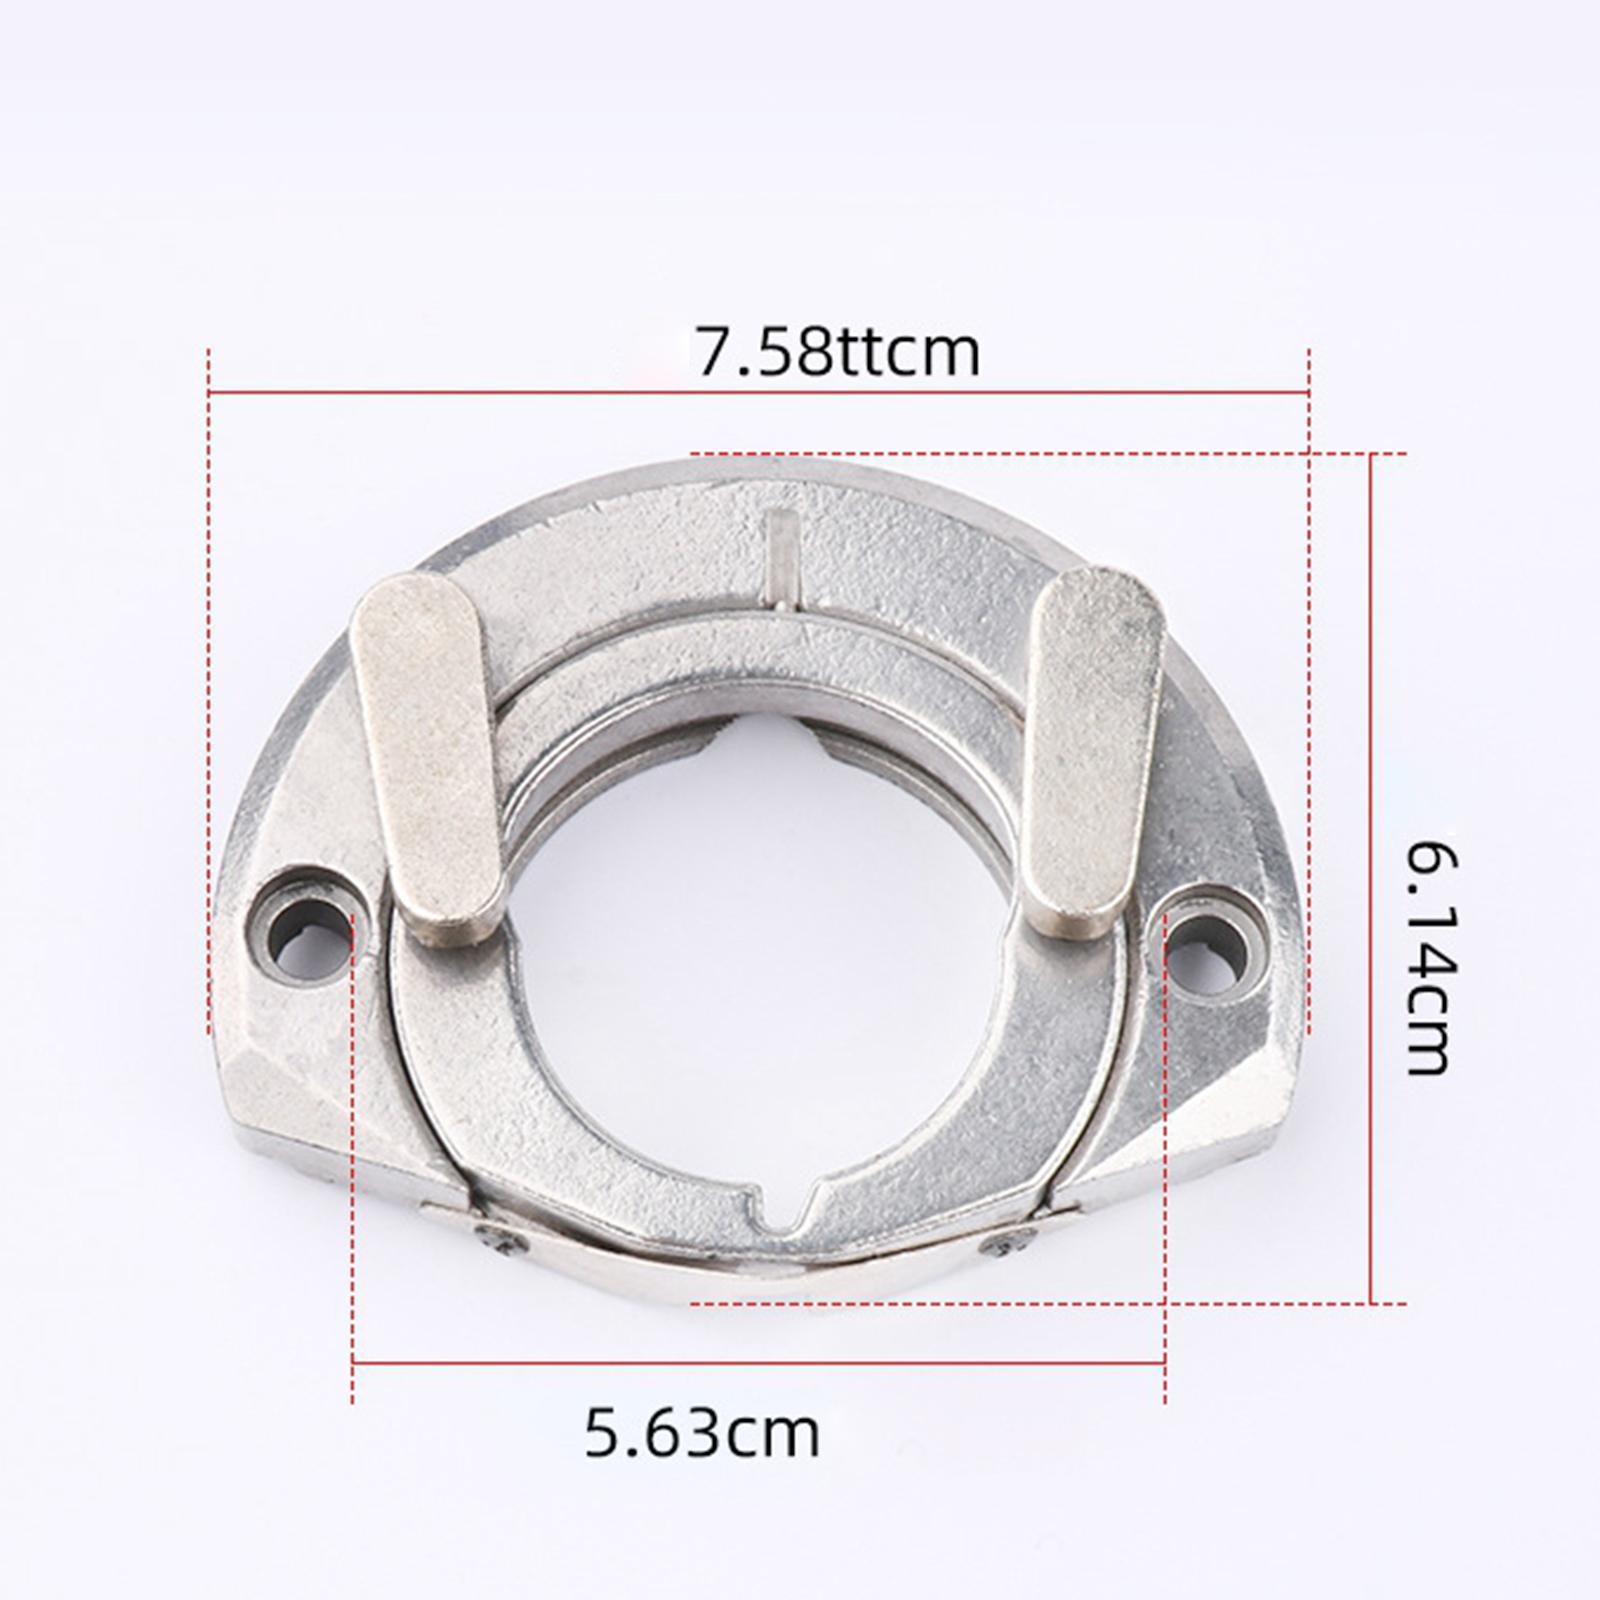 Sewing Machine Shuttle Bed Metal Accessory Durable Practical Heavy Duty Sewing Machine Parts Replaces for Domestic Old Style Sewing Machine